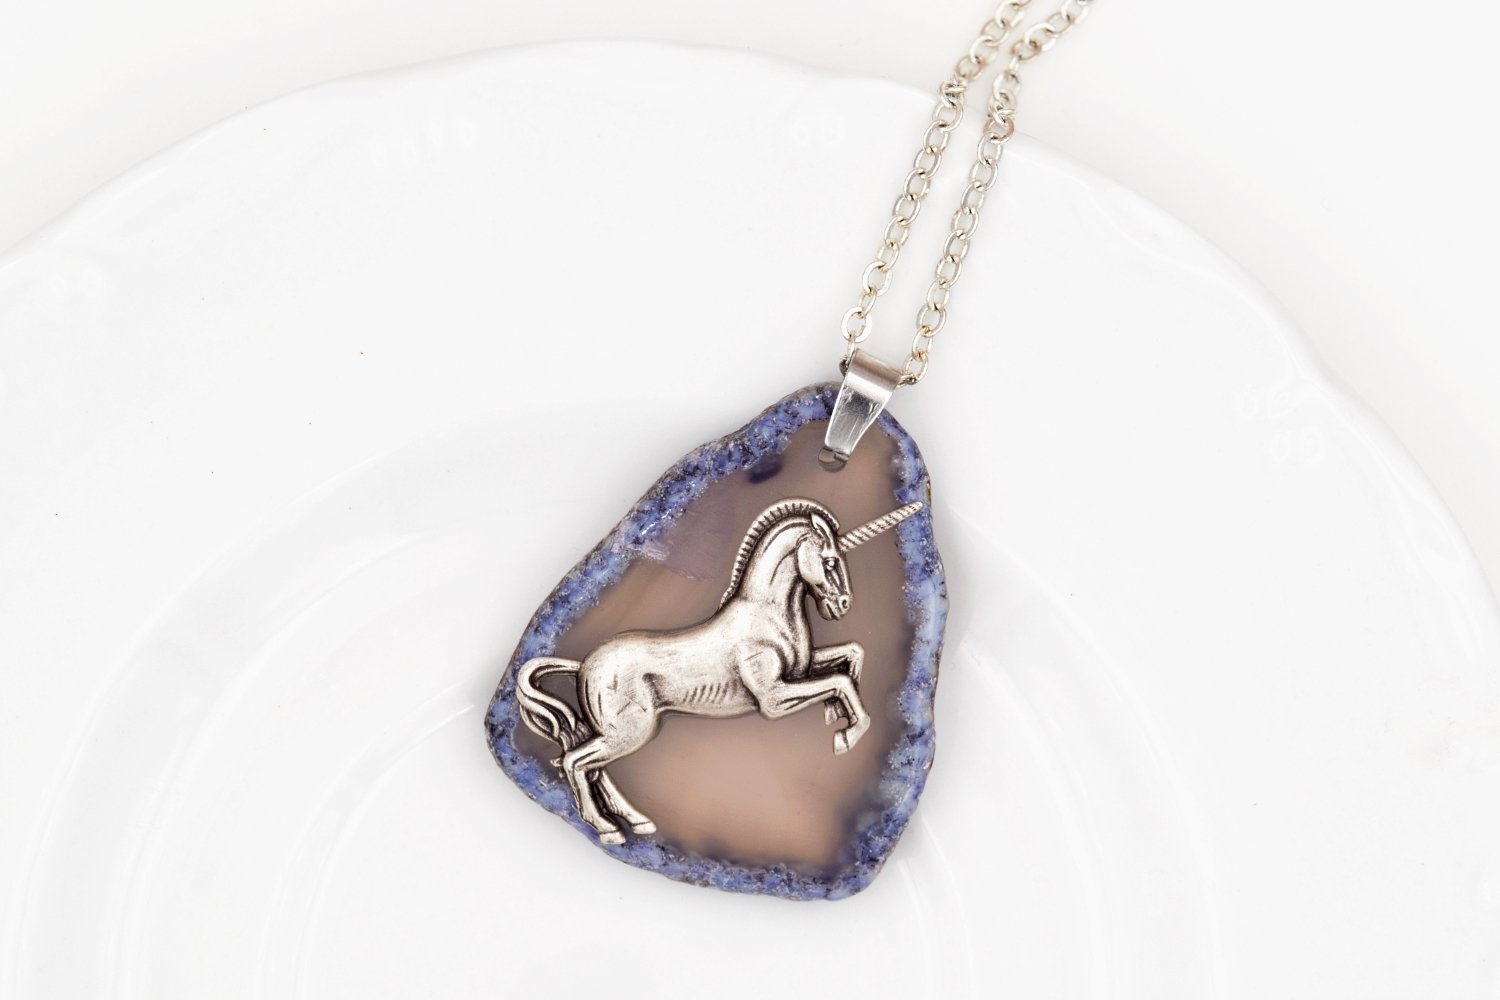 Unicorn Agate Slice Necklace (Dyed Lavender Purple, Fantasy Jewelry) fripparie